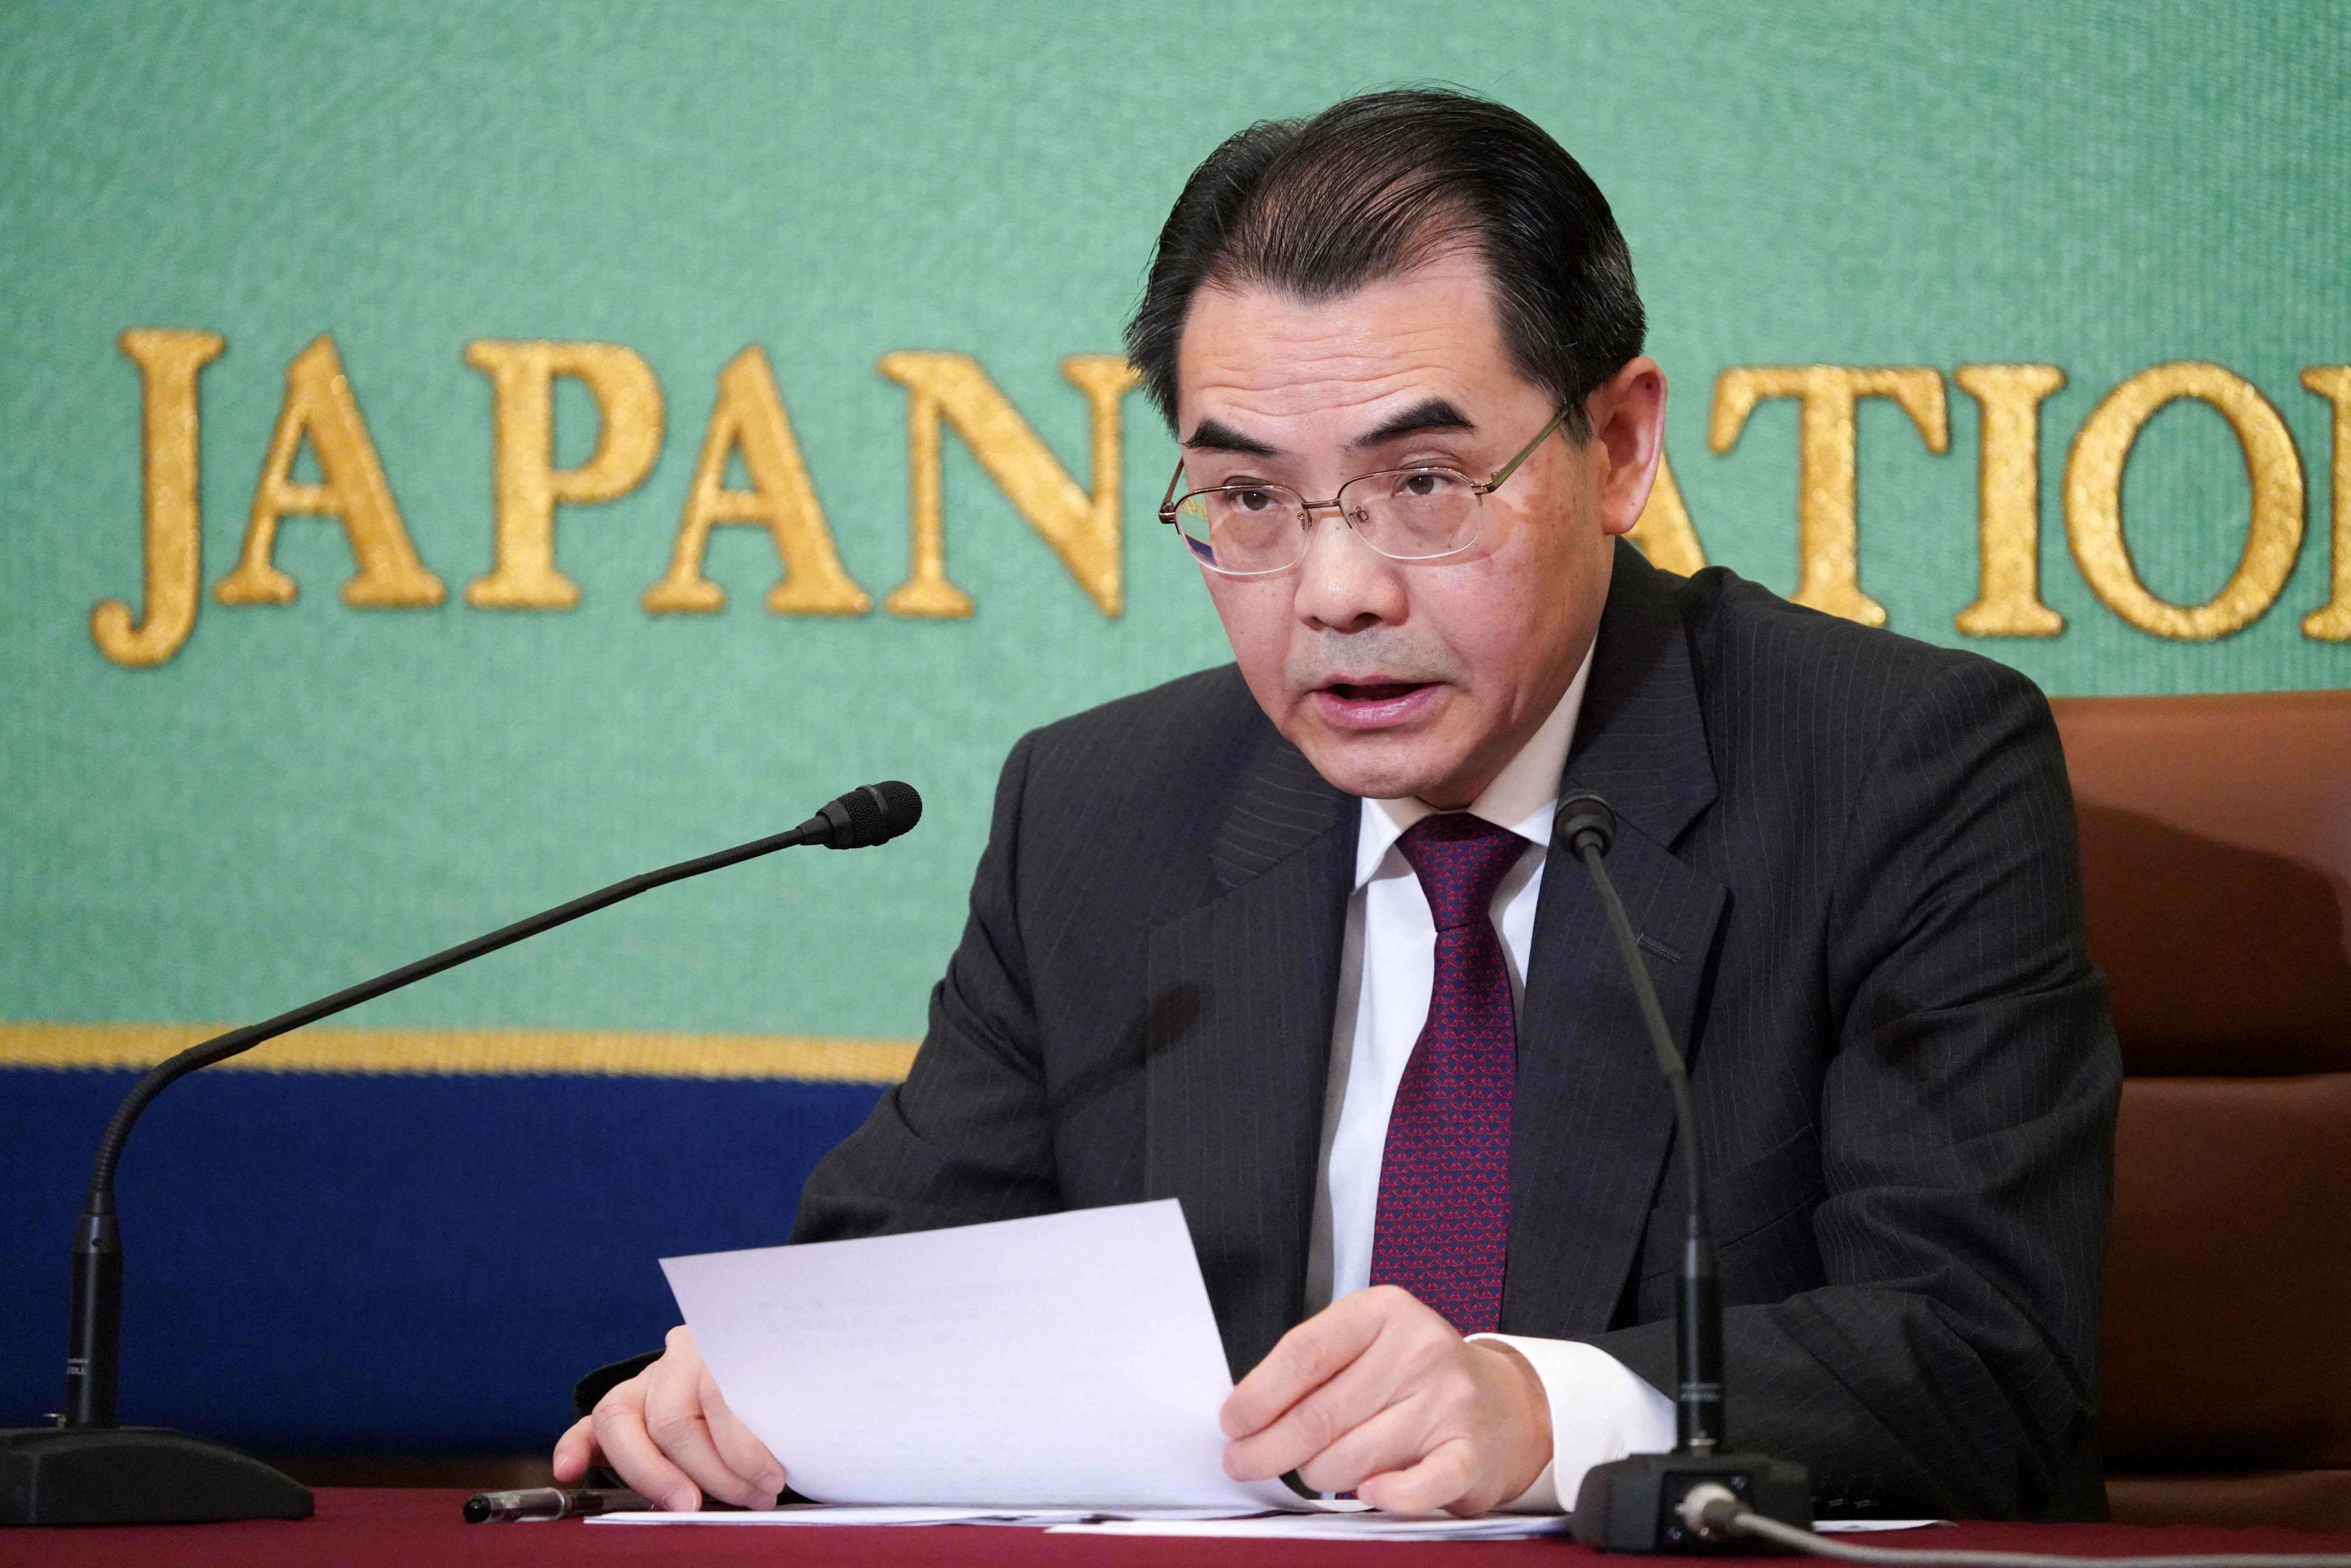 China’s Ambassador to Japan Wu Jianghao says the “Japanese people will be dragged into the fire” if they continue to support Taiwan’s independence. Photo: AFP